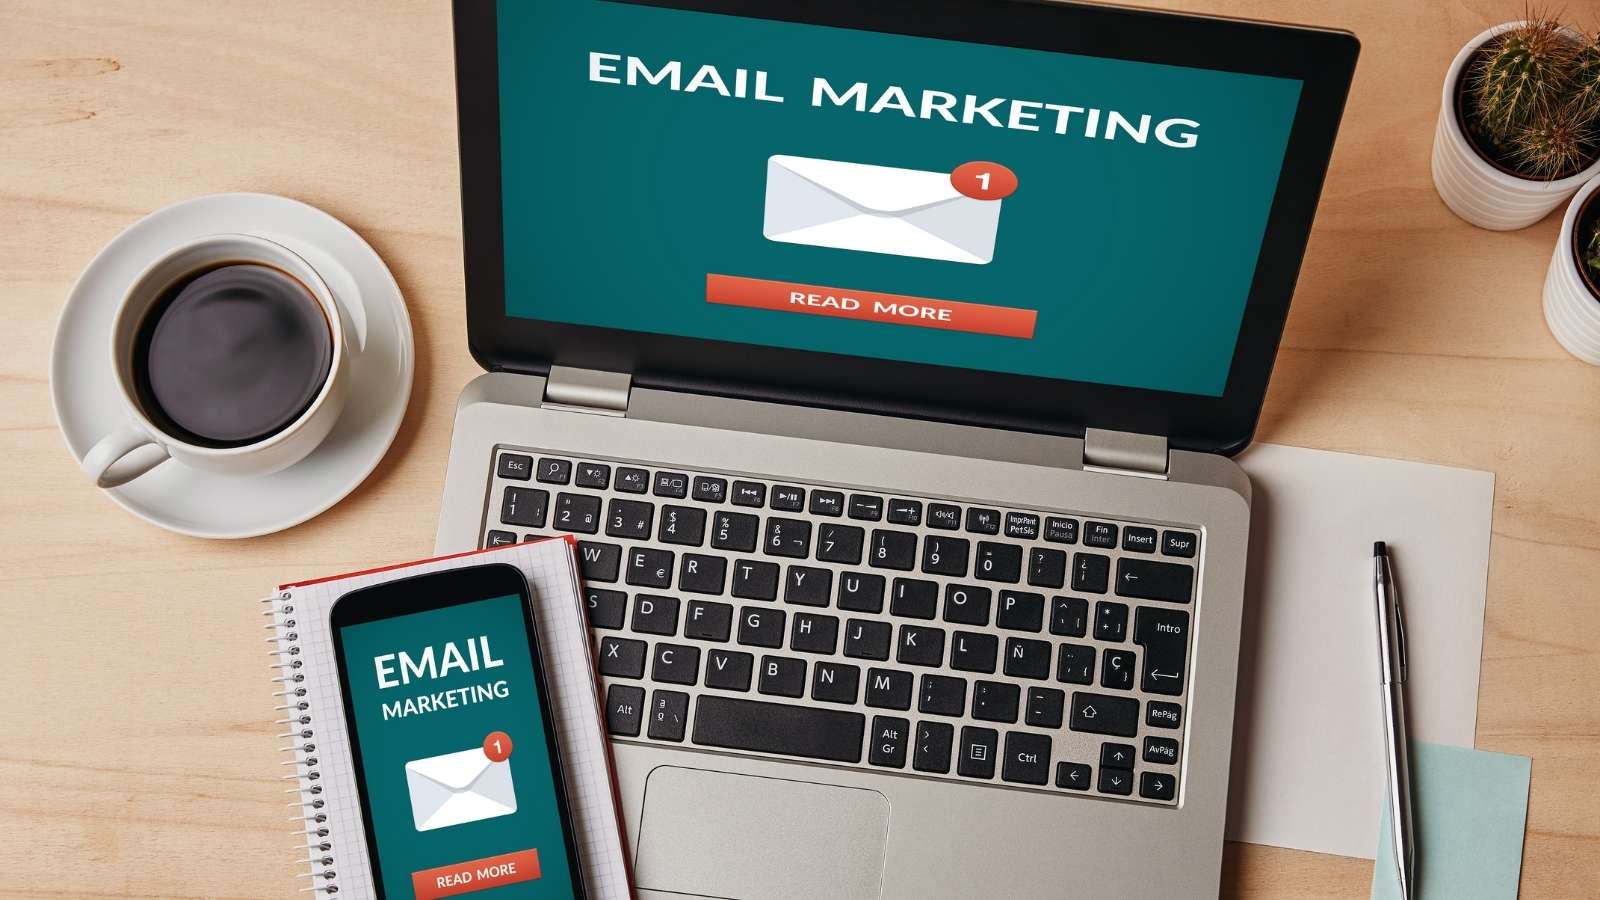 Direct email marketing to help brands increase sales